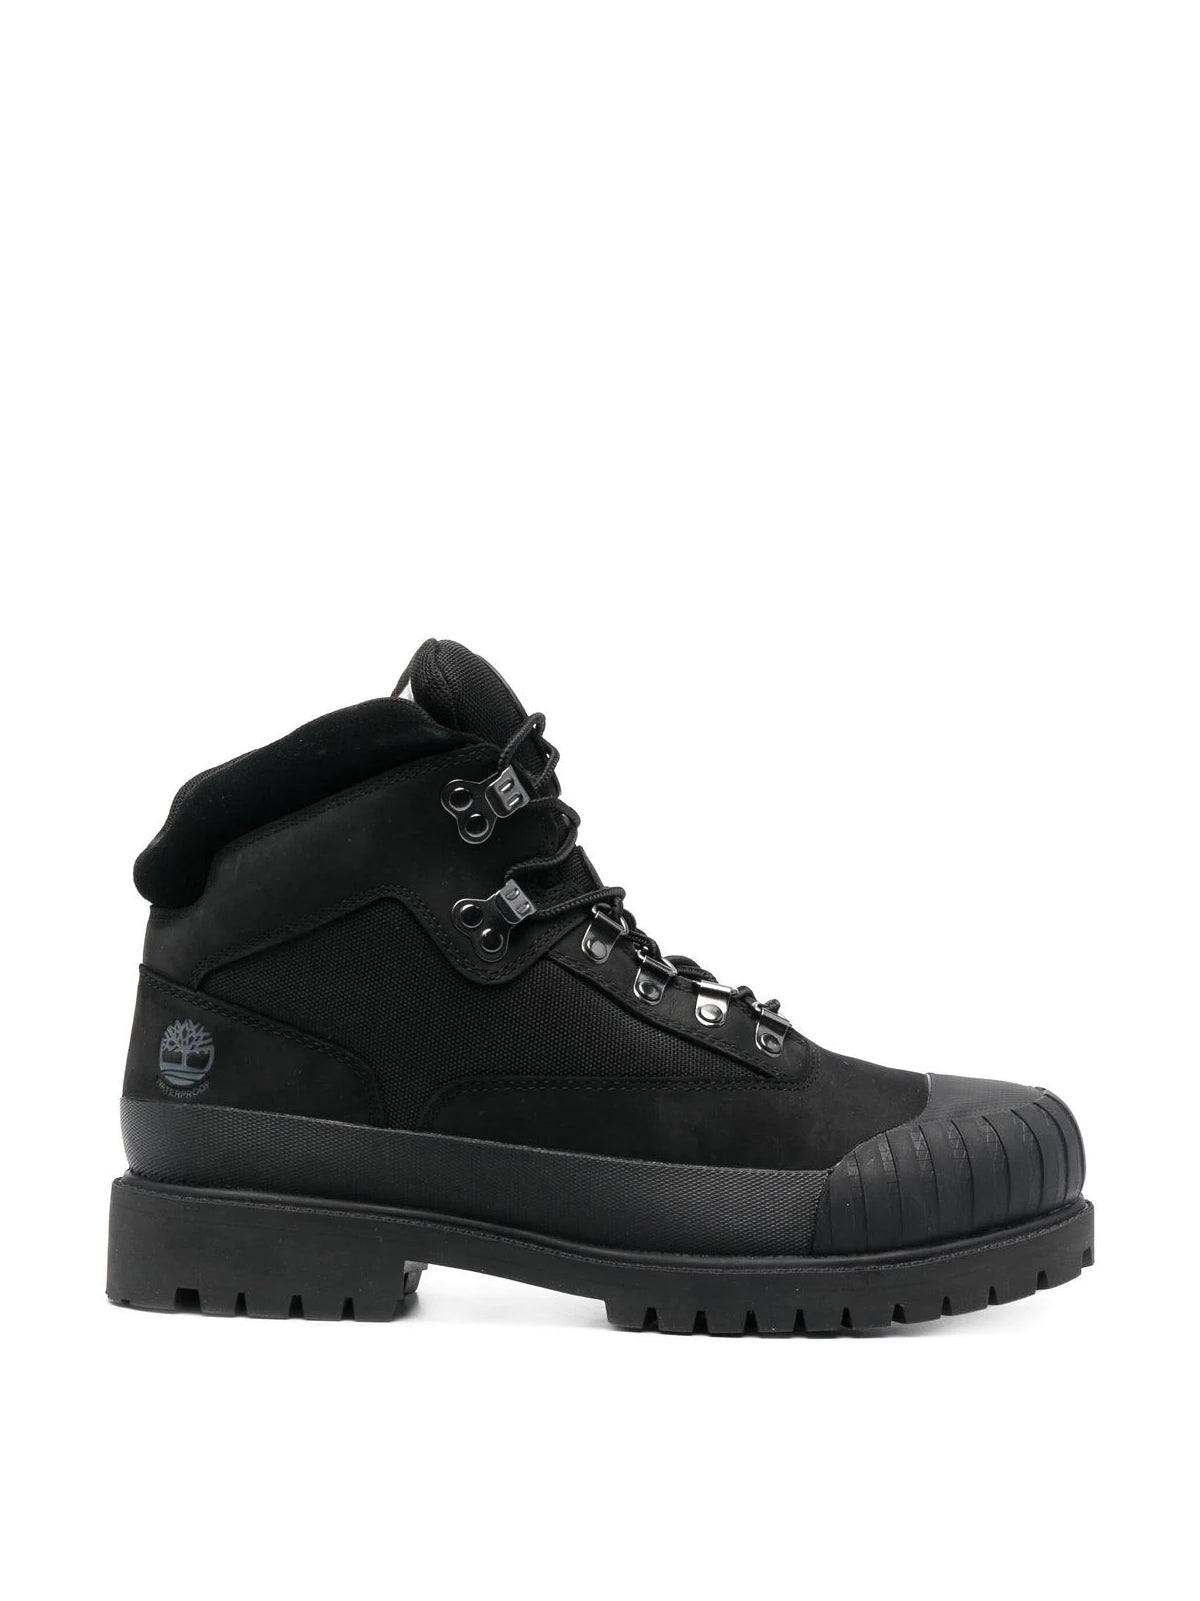 Timberland-OUTLET-SALE-Heritage Rubber Toe Hiker Boots-ARCHIVIST